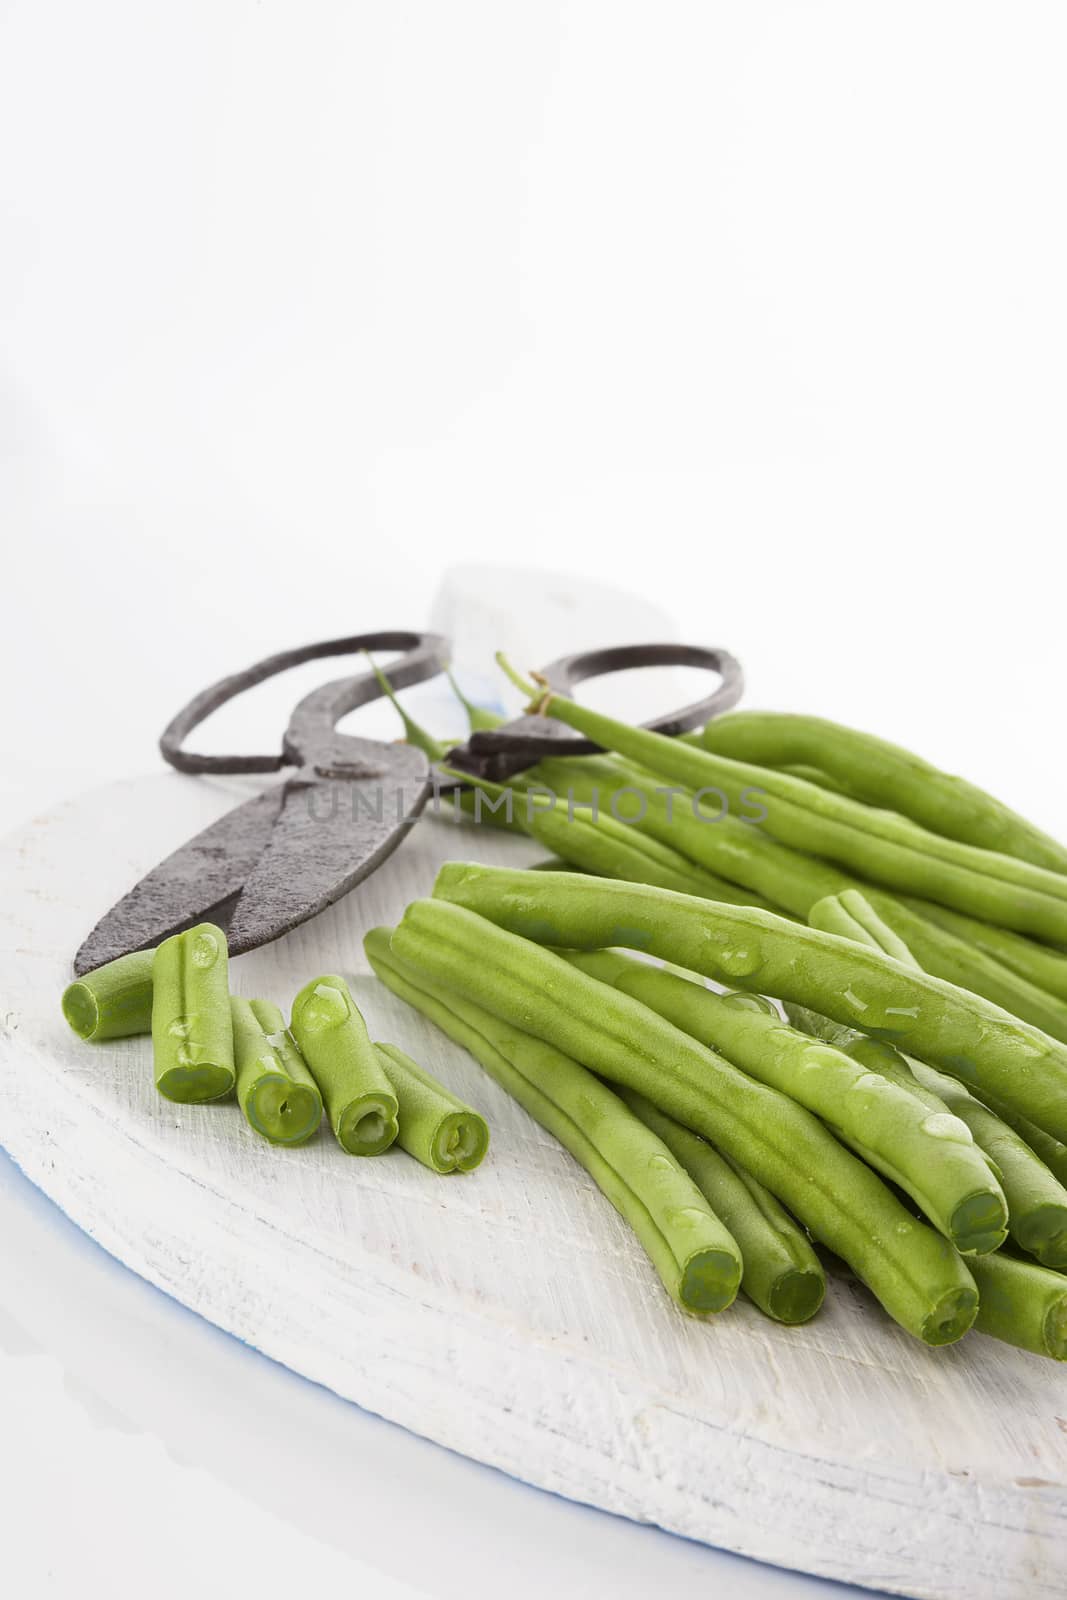 Green beans with water drops on wooden chopping board with vintage scissors isolated on white background. Healthy eating. 